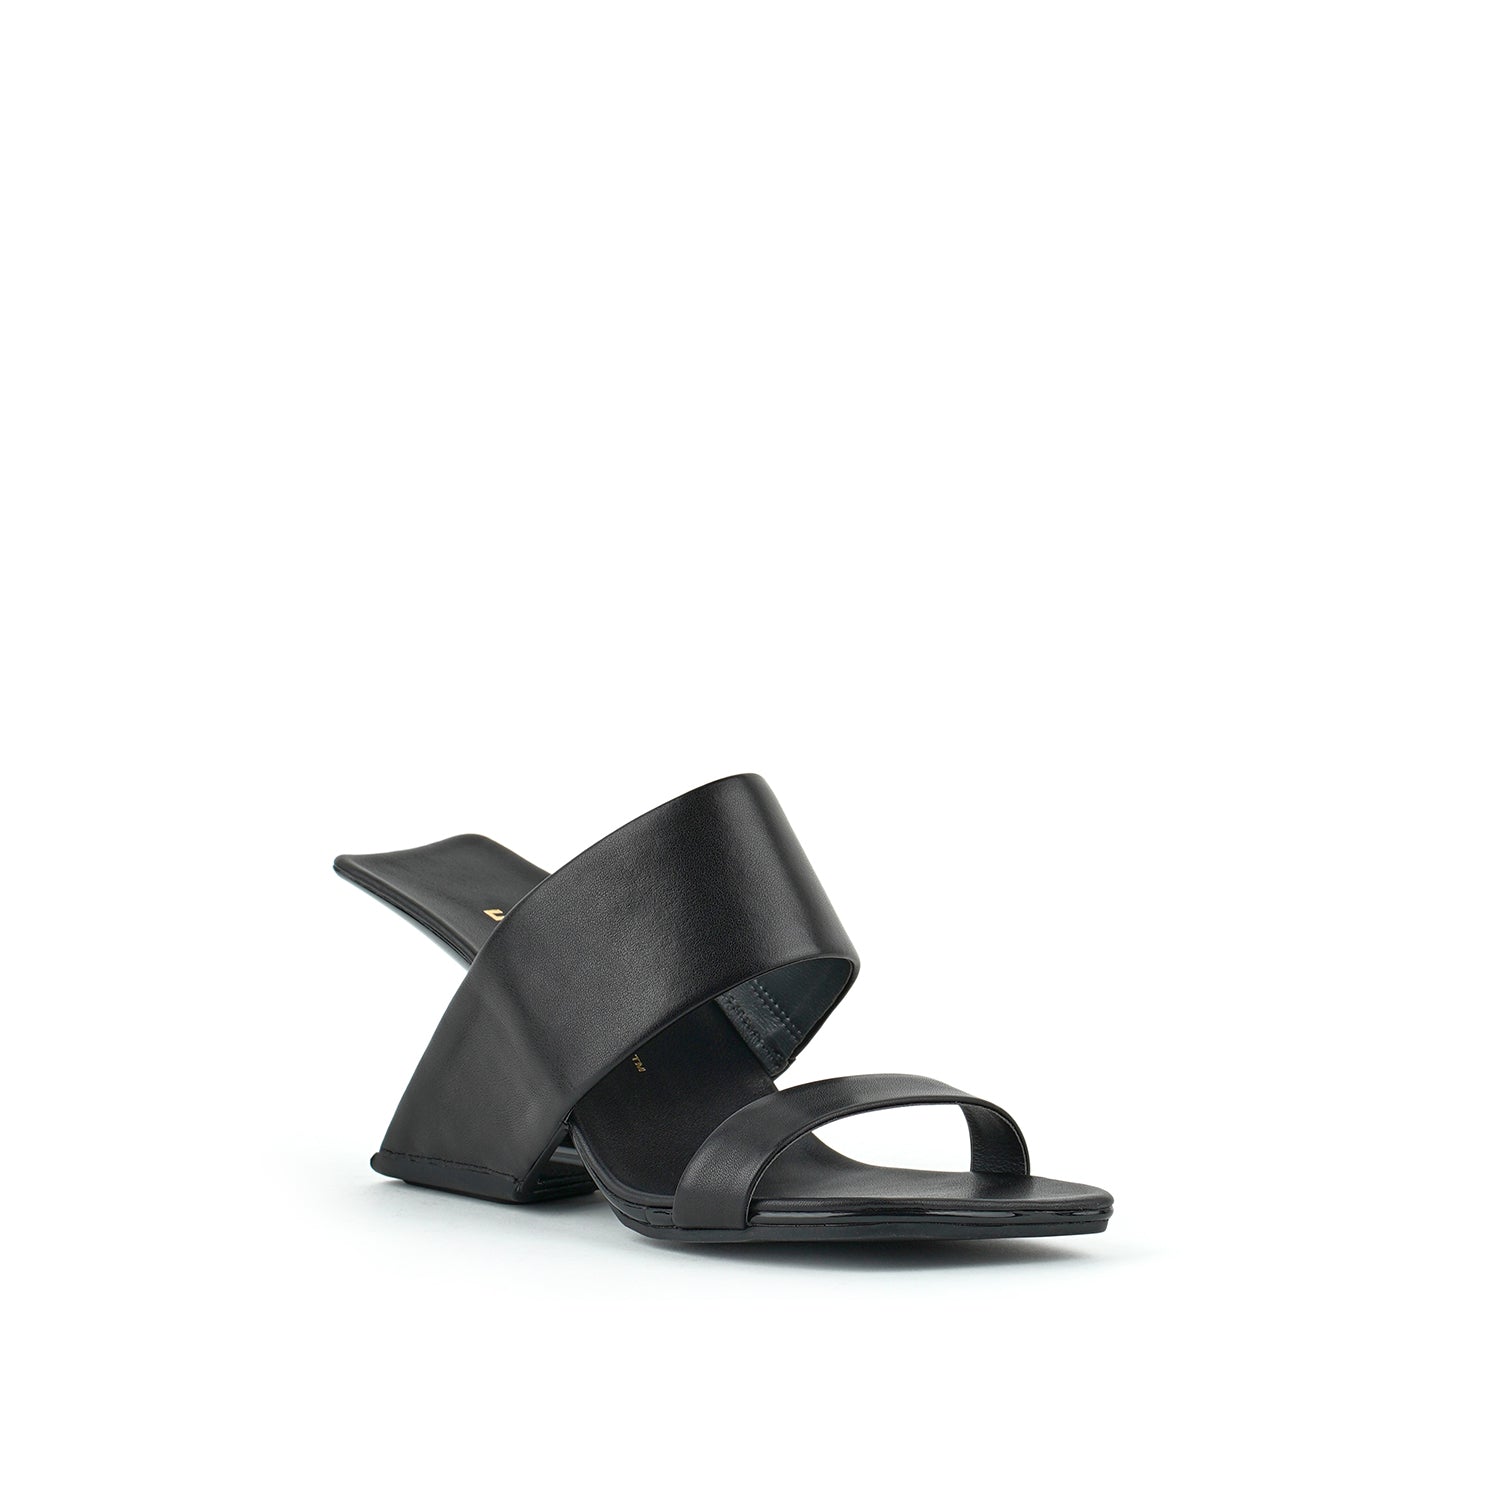 outer front side view of the united nude loop hi sandal. This black square toed sandal is high-heeled and showcases a floating-like heel and two bands over the instep.  